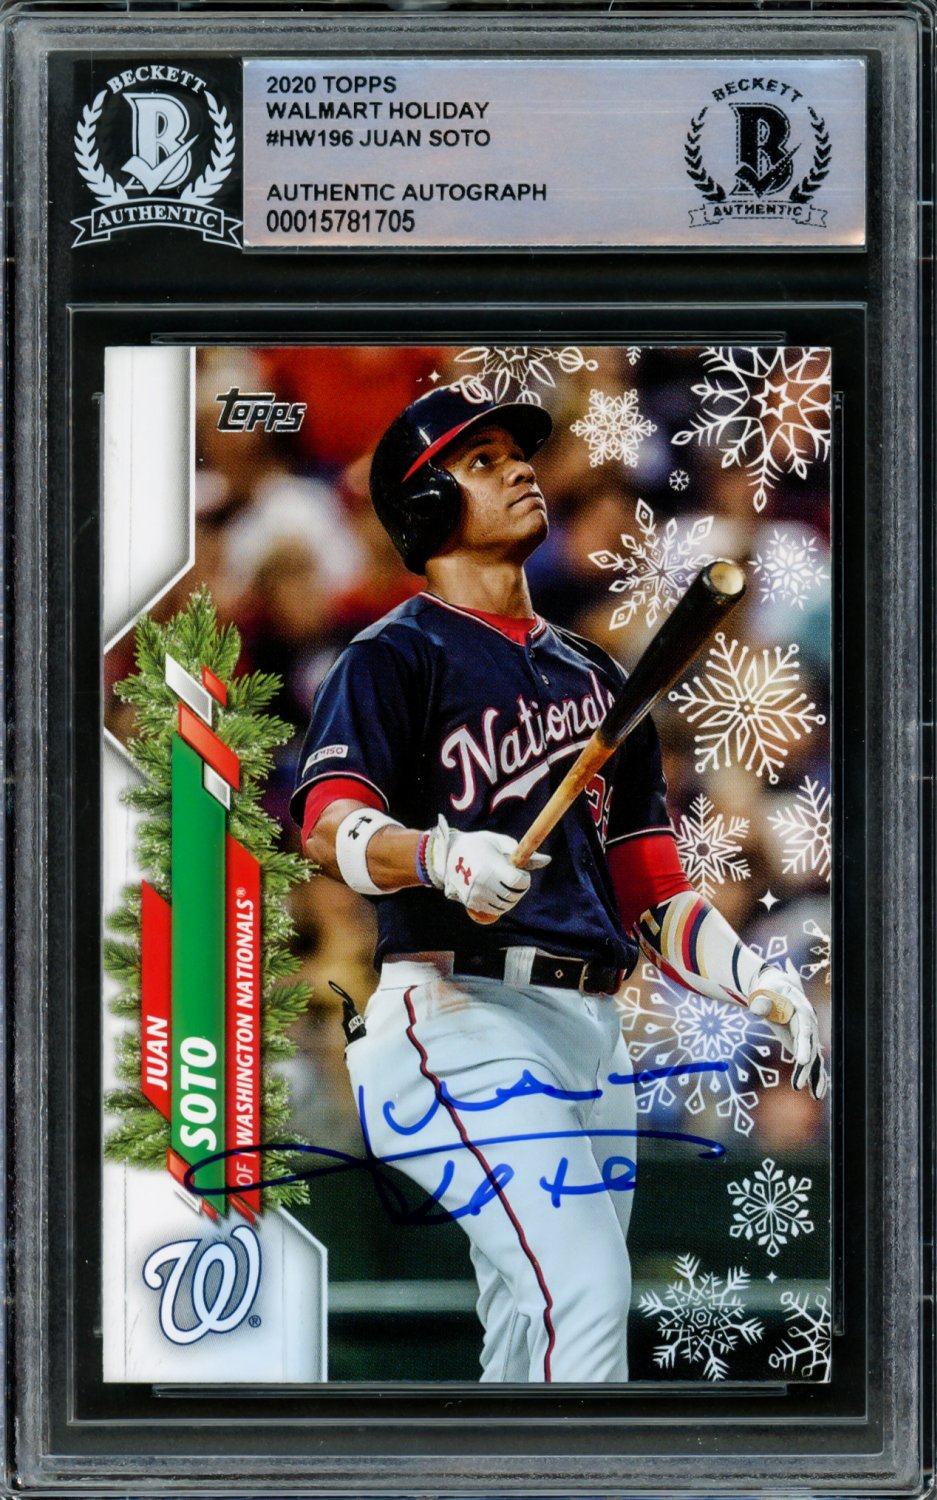 Juan Soto Autographed Signed 2020 Topps Walmart Holiday Card